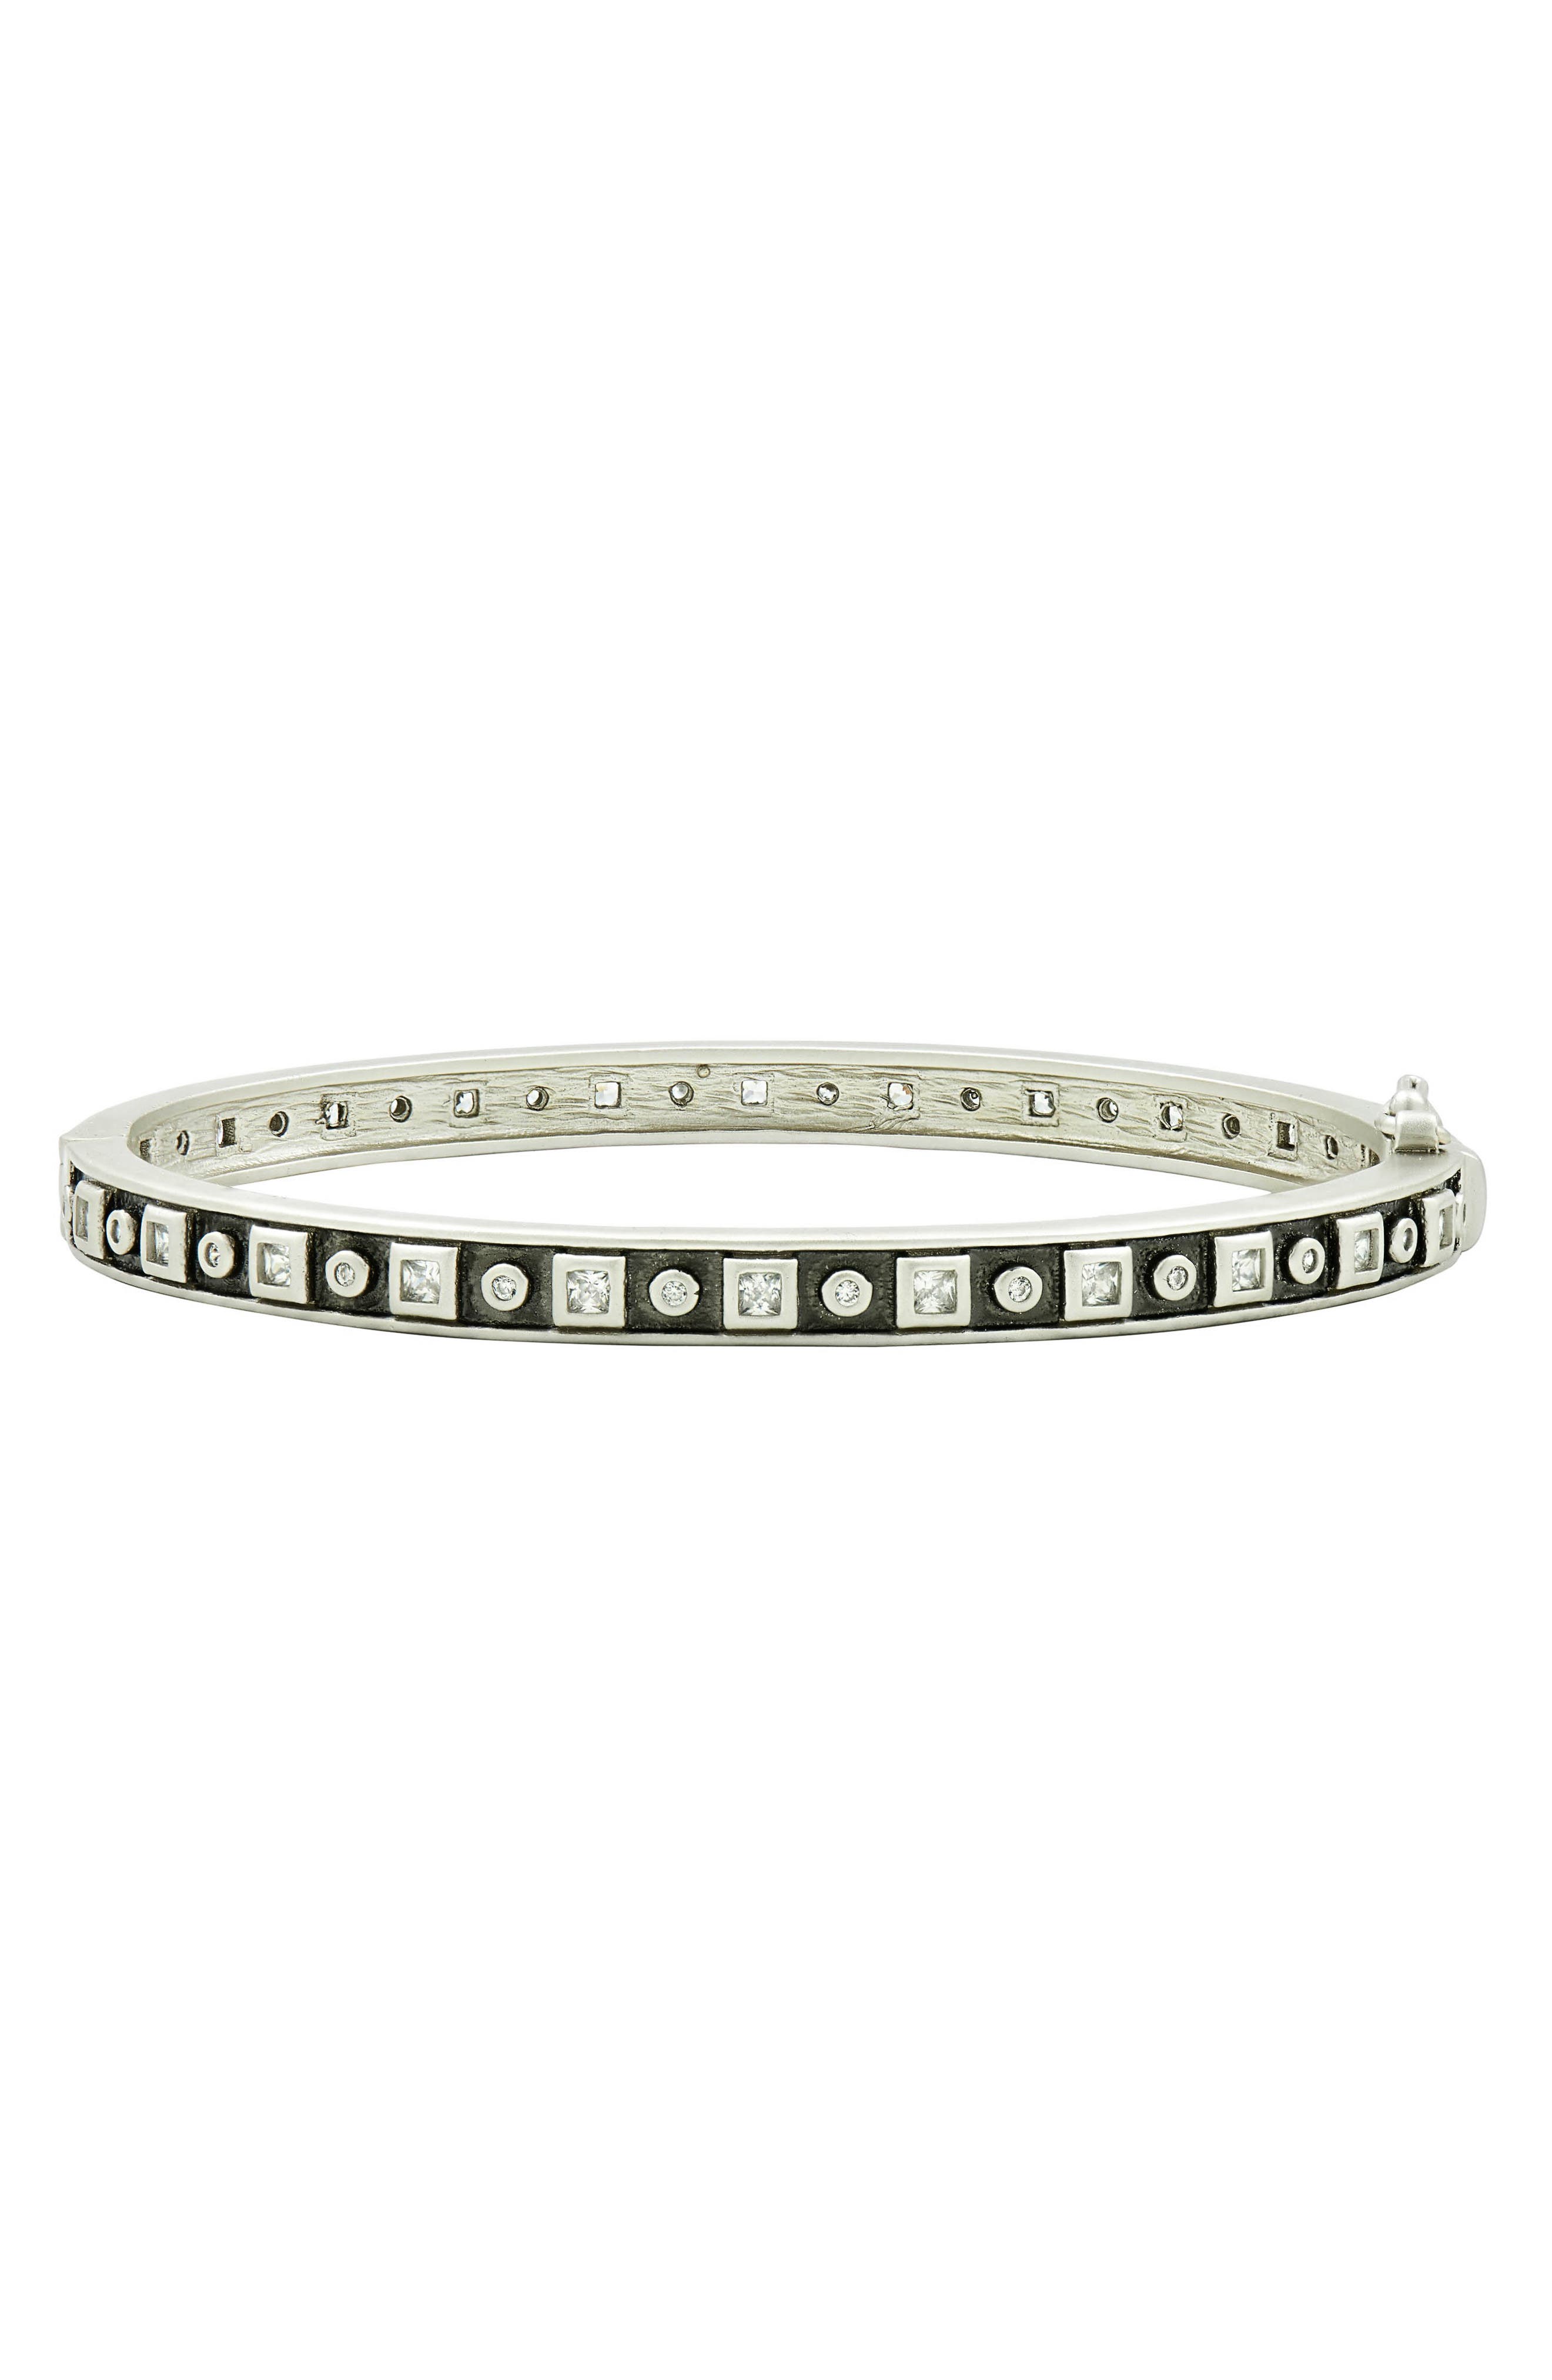 FREIDA ROTHMAN Signature Geometric Stacking Bangle Bracelet in Silver And Black at Nordstrom -  PRZB080203B-H